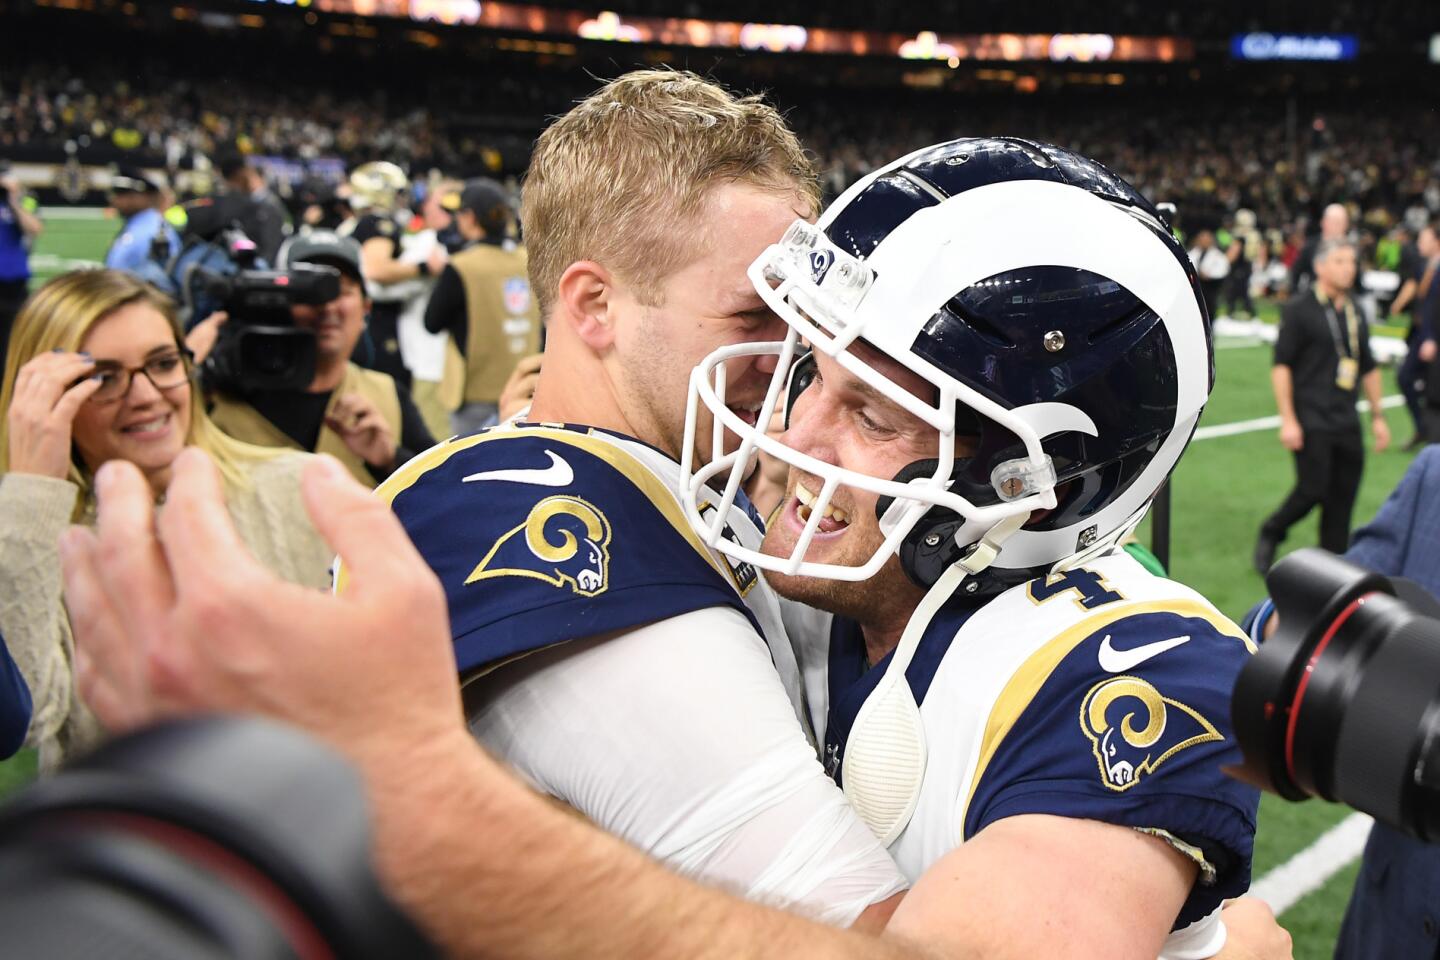 Rams quarterback Jared Goff hugs kicker Greg Zuerlein after defeating the New Orleans Saints in overtime on a field goal in the NFC Championship at the Superdome in New Orleans Sunday.